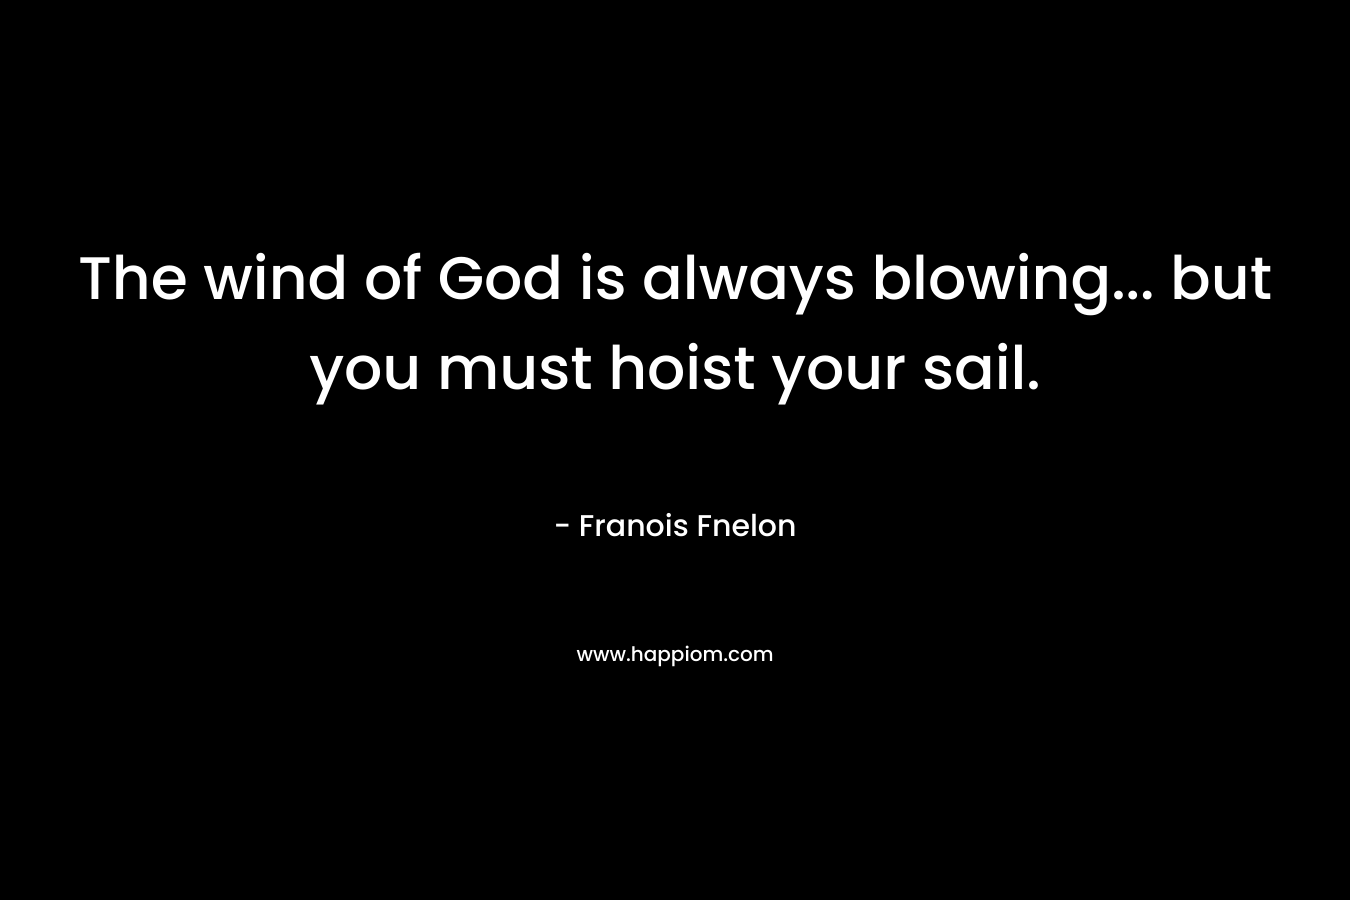 The wind of God is always blowing... but you must hoist your sail.